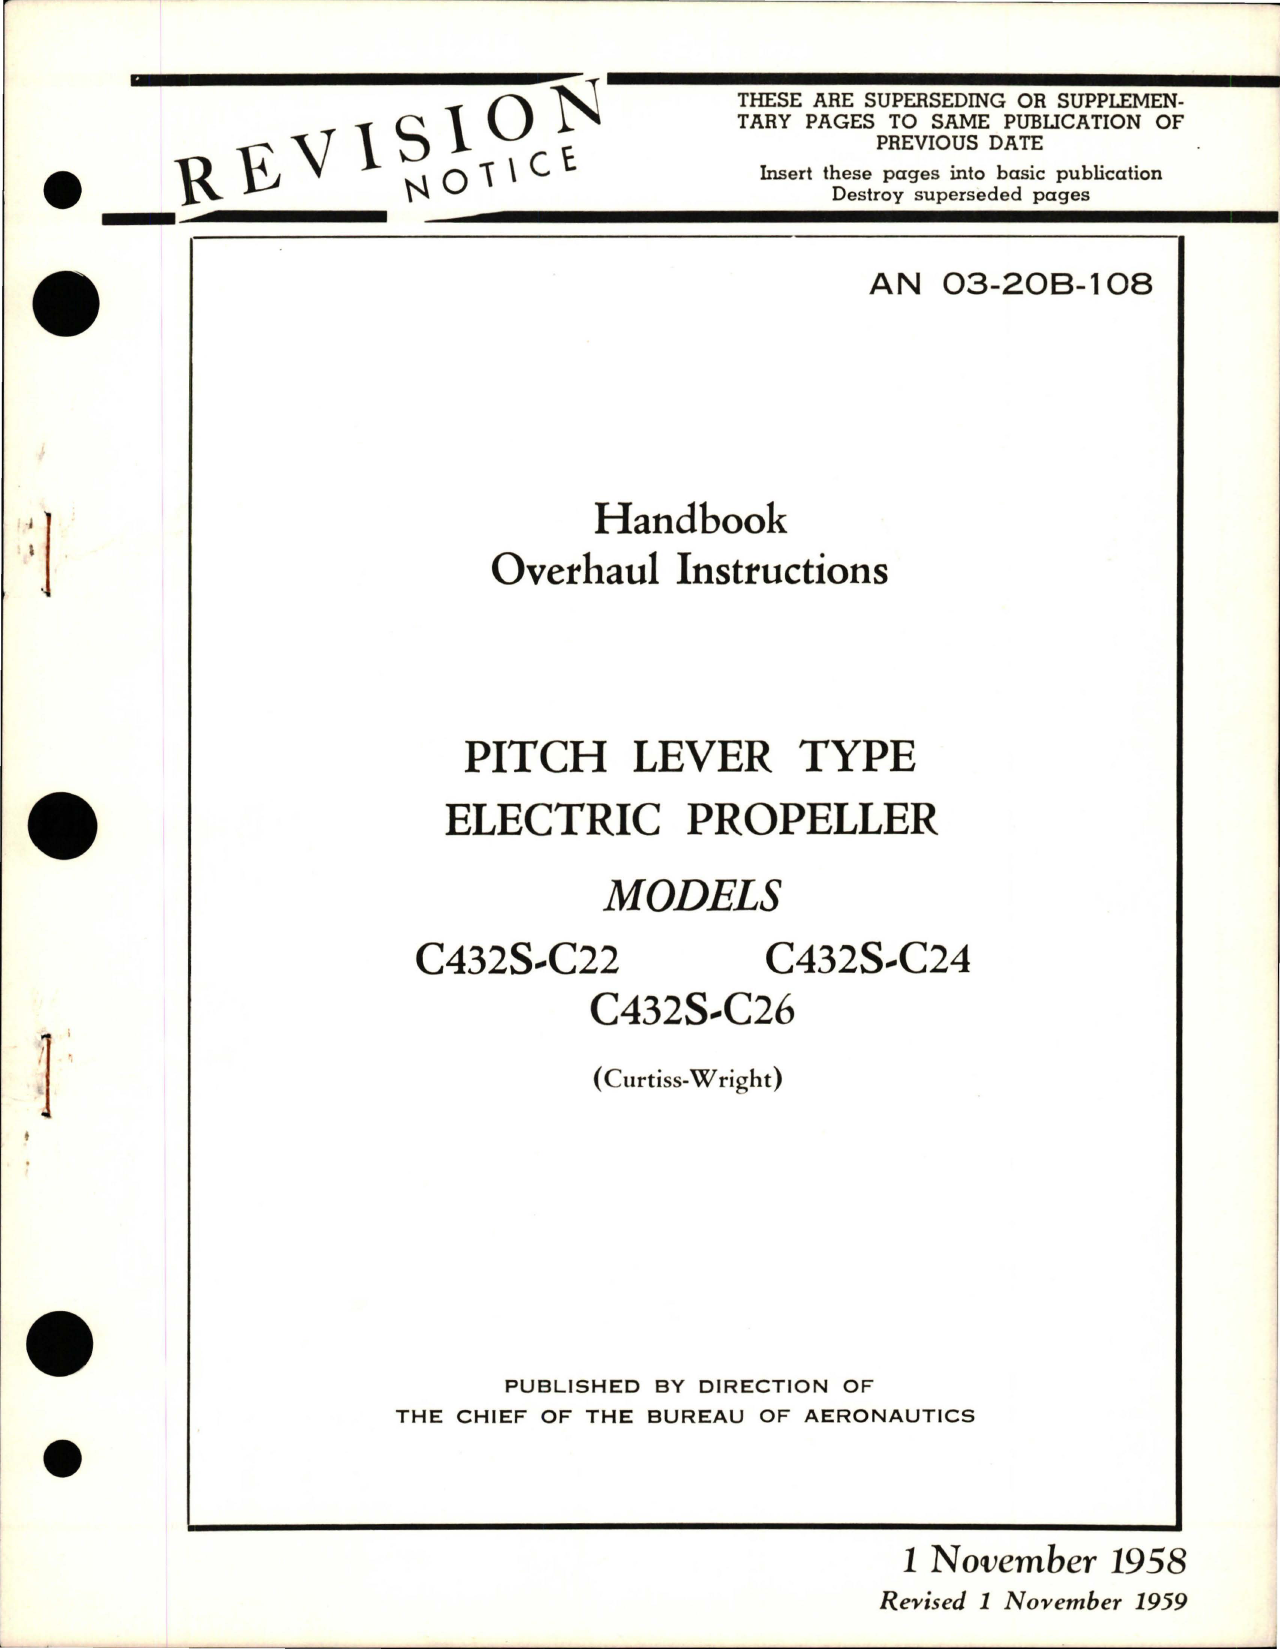 Sample page 1 from AirCorps Library document: Overhaul Instructions for Pitch Lever Type Electric Propeller - Models C432S-C22, C432S-C24, and C432S-C26